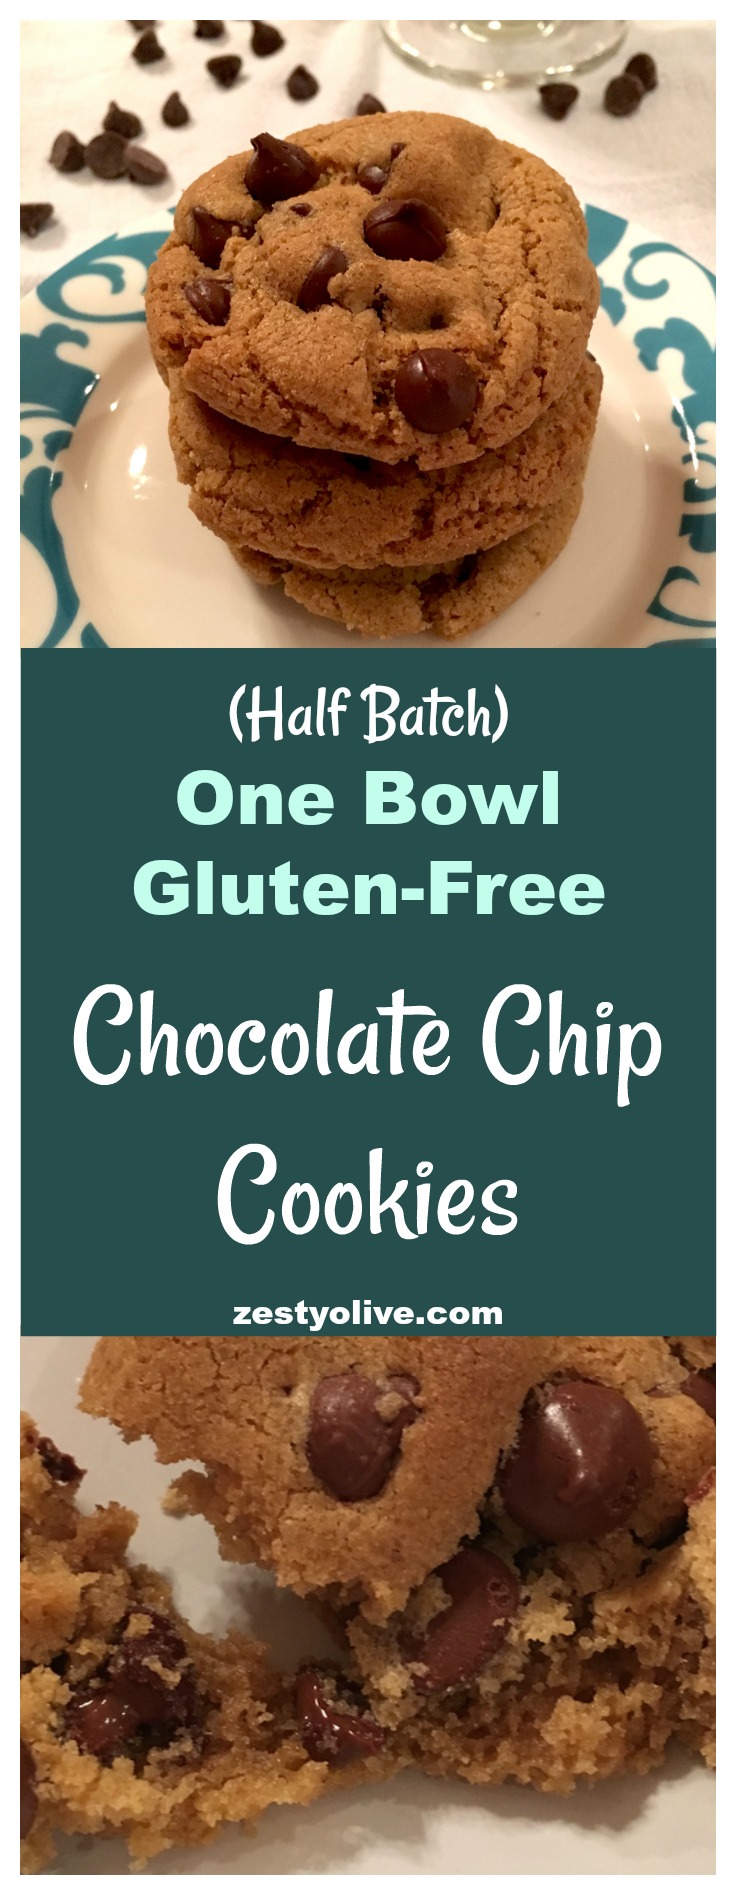 Easy Gluten-Free One Bowl Half Batch Chocolate Chip Cookies. Gooey and delicious - the best chocolate chip cookie recipe!